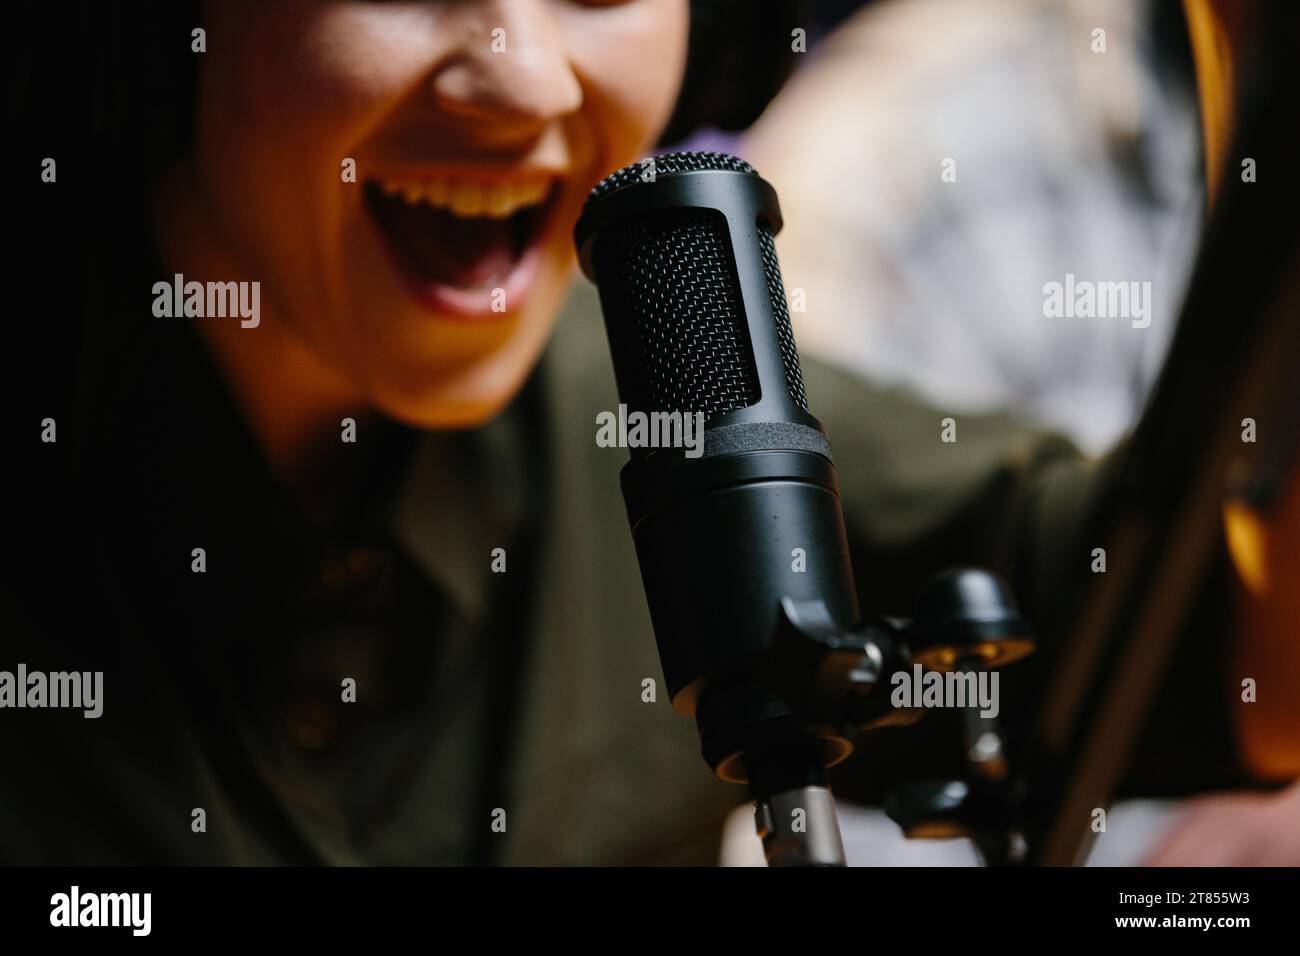 Close-up, dubbing actor or radio host speaking into a microphone. Stock Photo